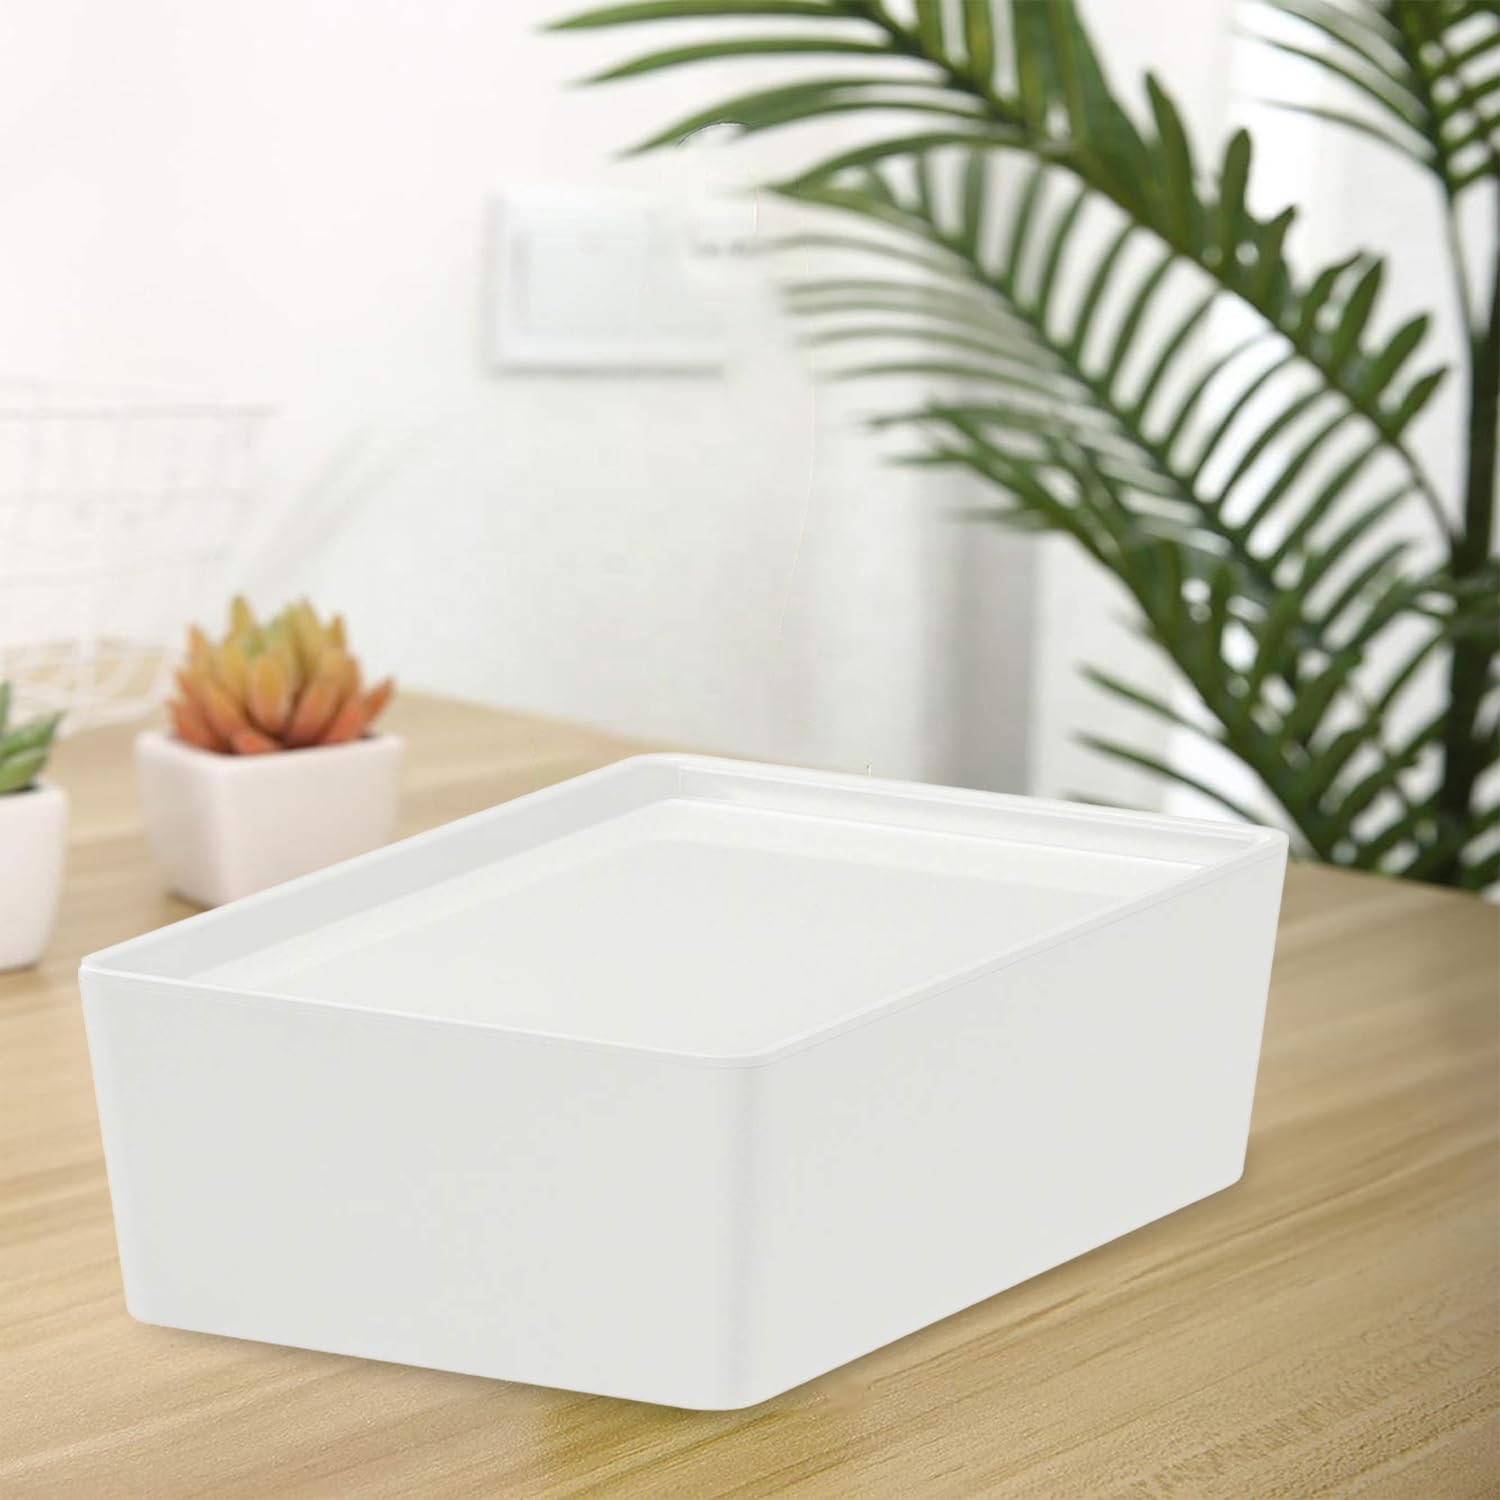 Kuber Industries Multipurpose Sturdy Cloth Storage Box/Basket with Lid (White)